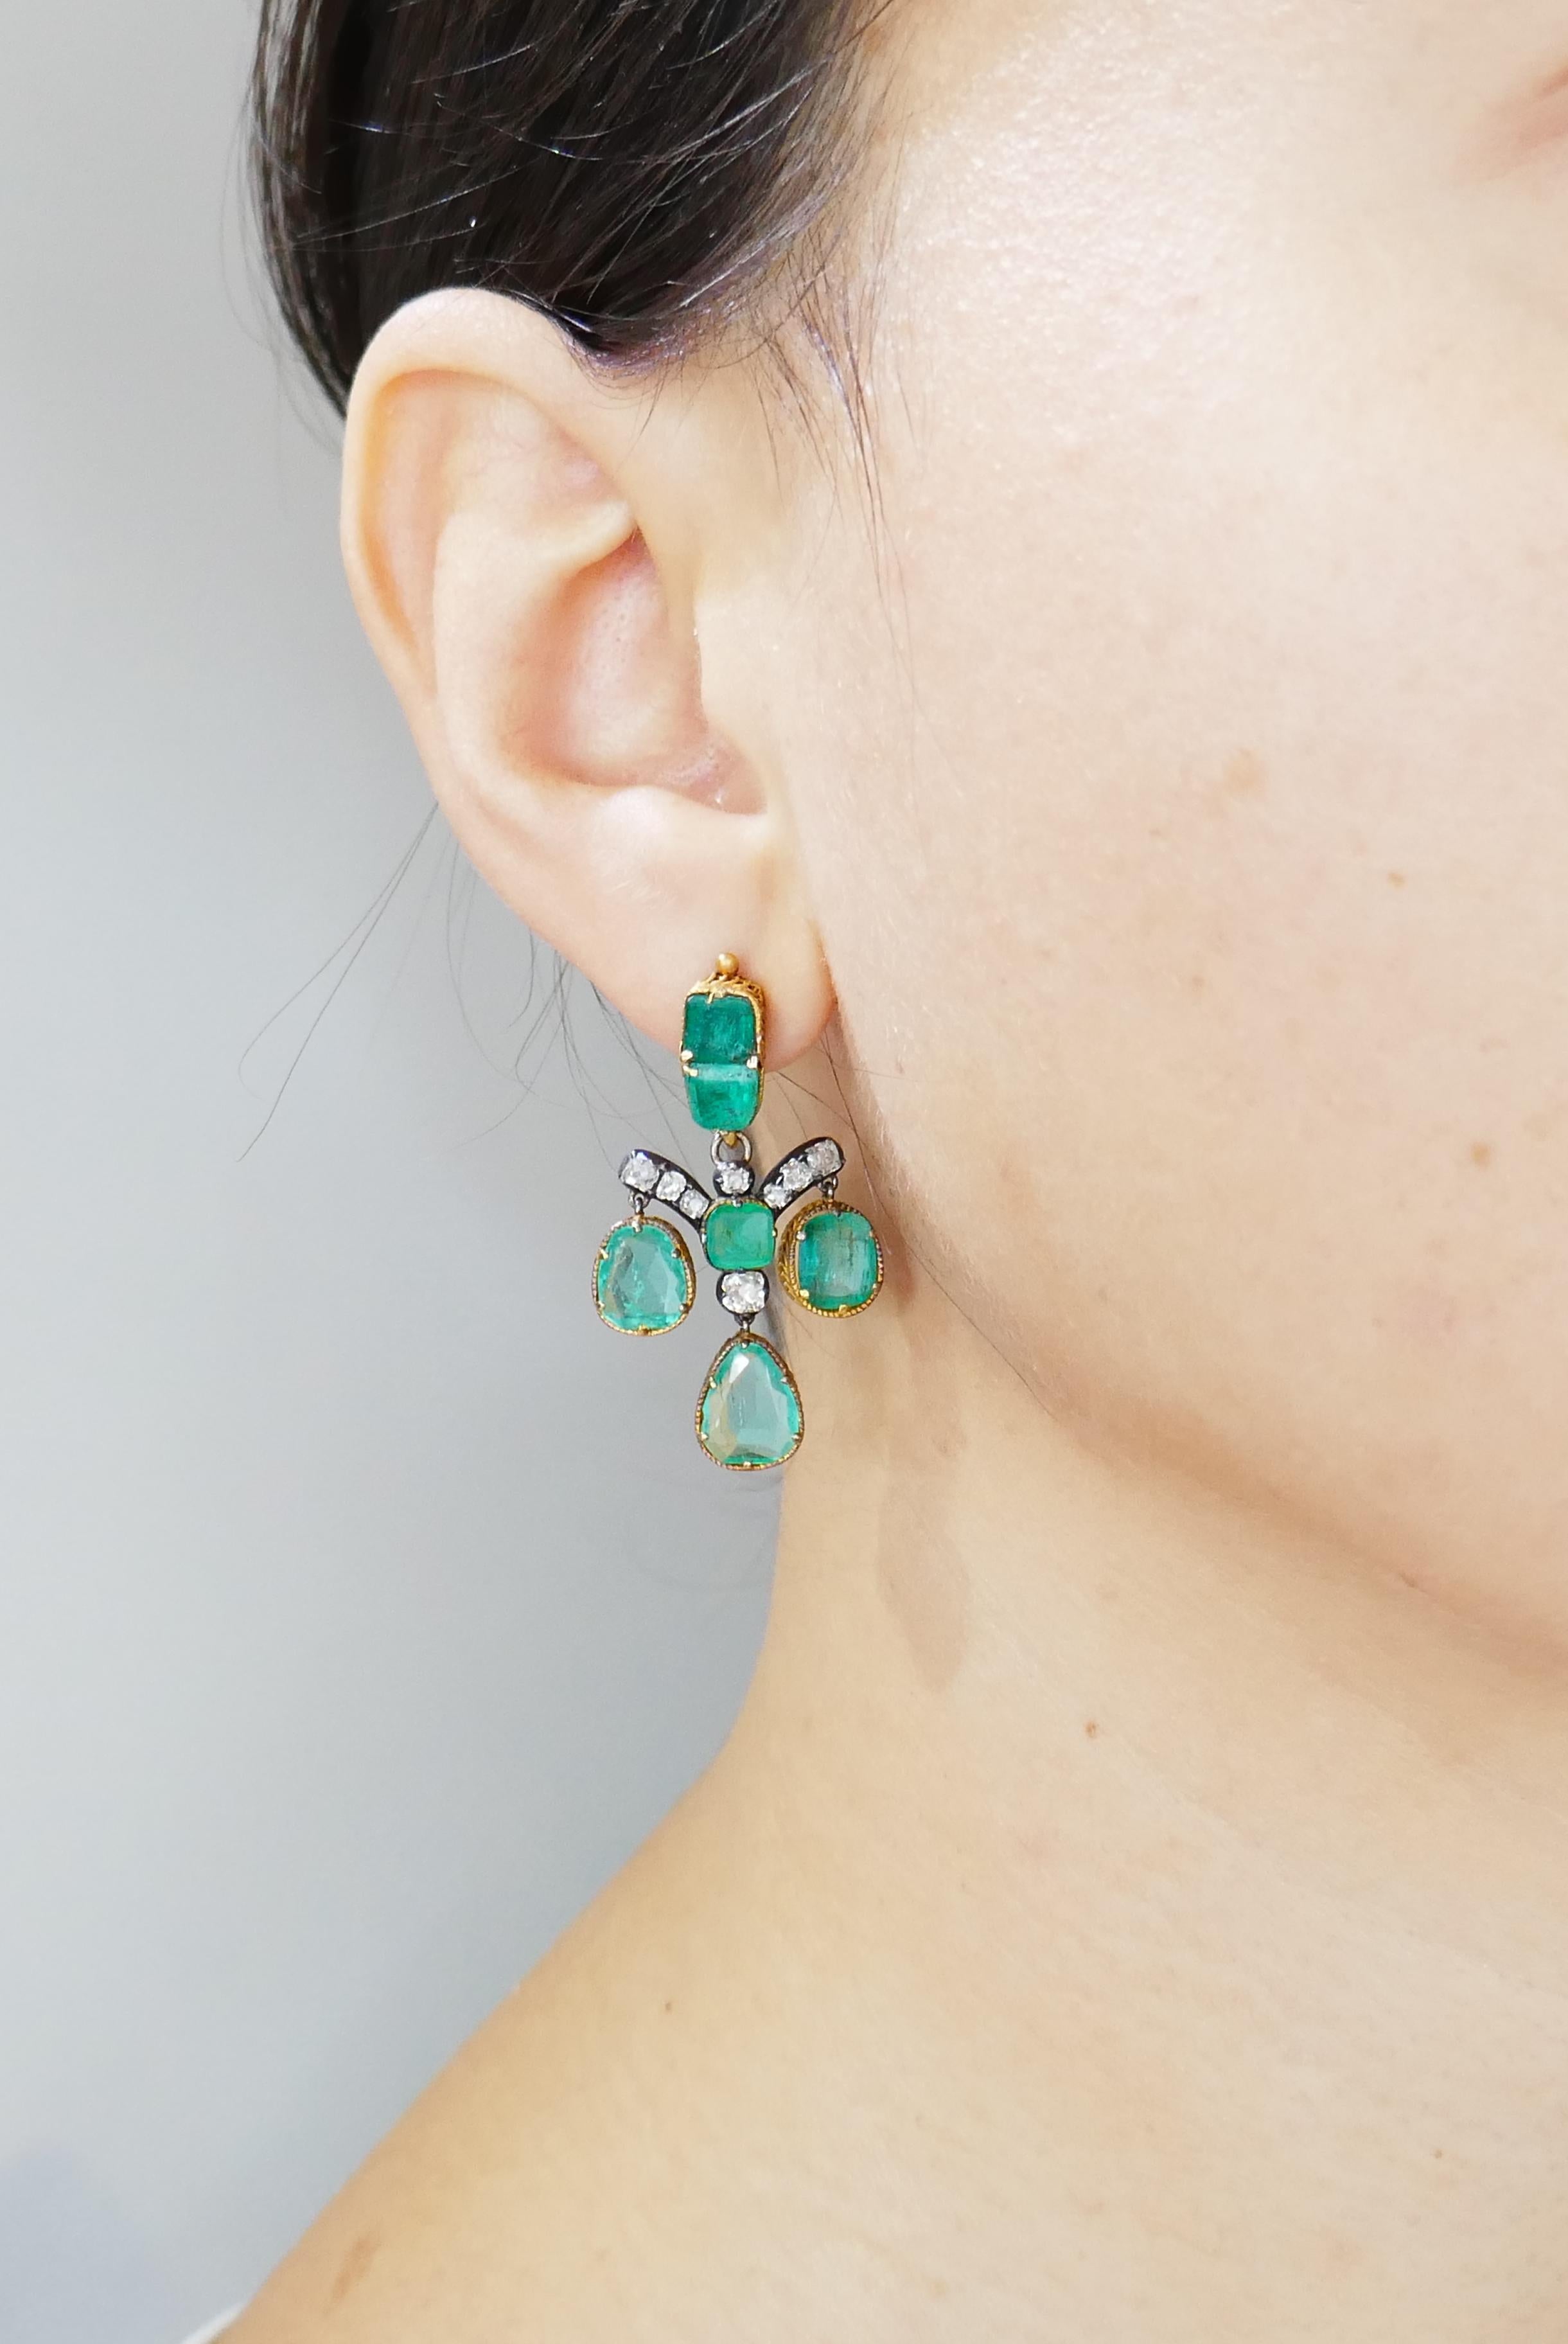 Dramatic yet wearable dangle earrings.
The earrings are made of 14 karat (tested) yellow gold and set with emeralds and old mine cut diamonds. Aged patina on gold accentuates antiquity of the earrings, vivid green color of the emeralds keeps an eye